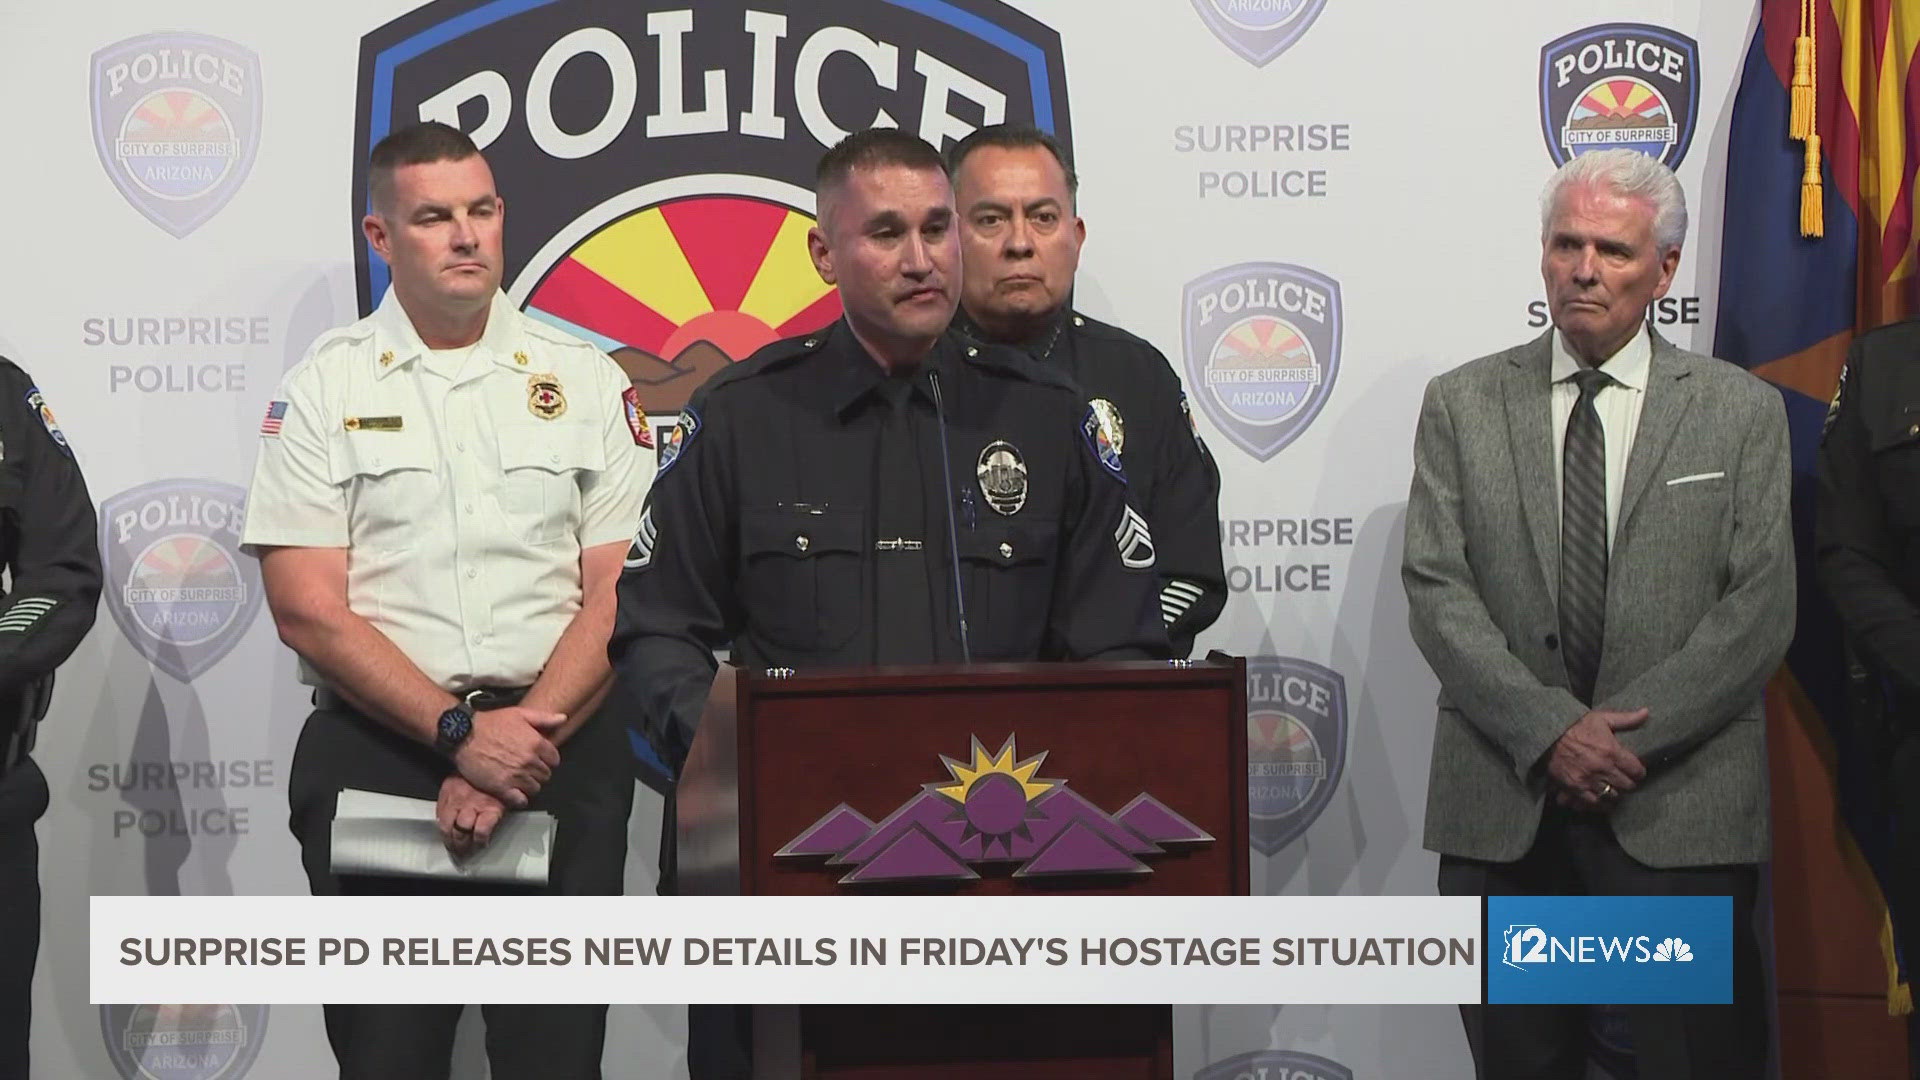 Surprise police are releasing new details after a hostage situation in which a baby was shot last week.